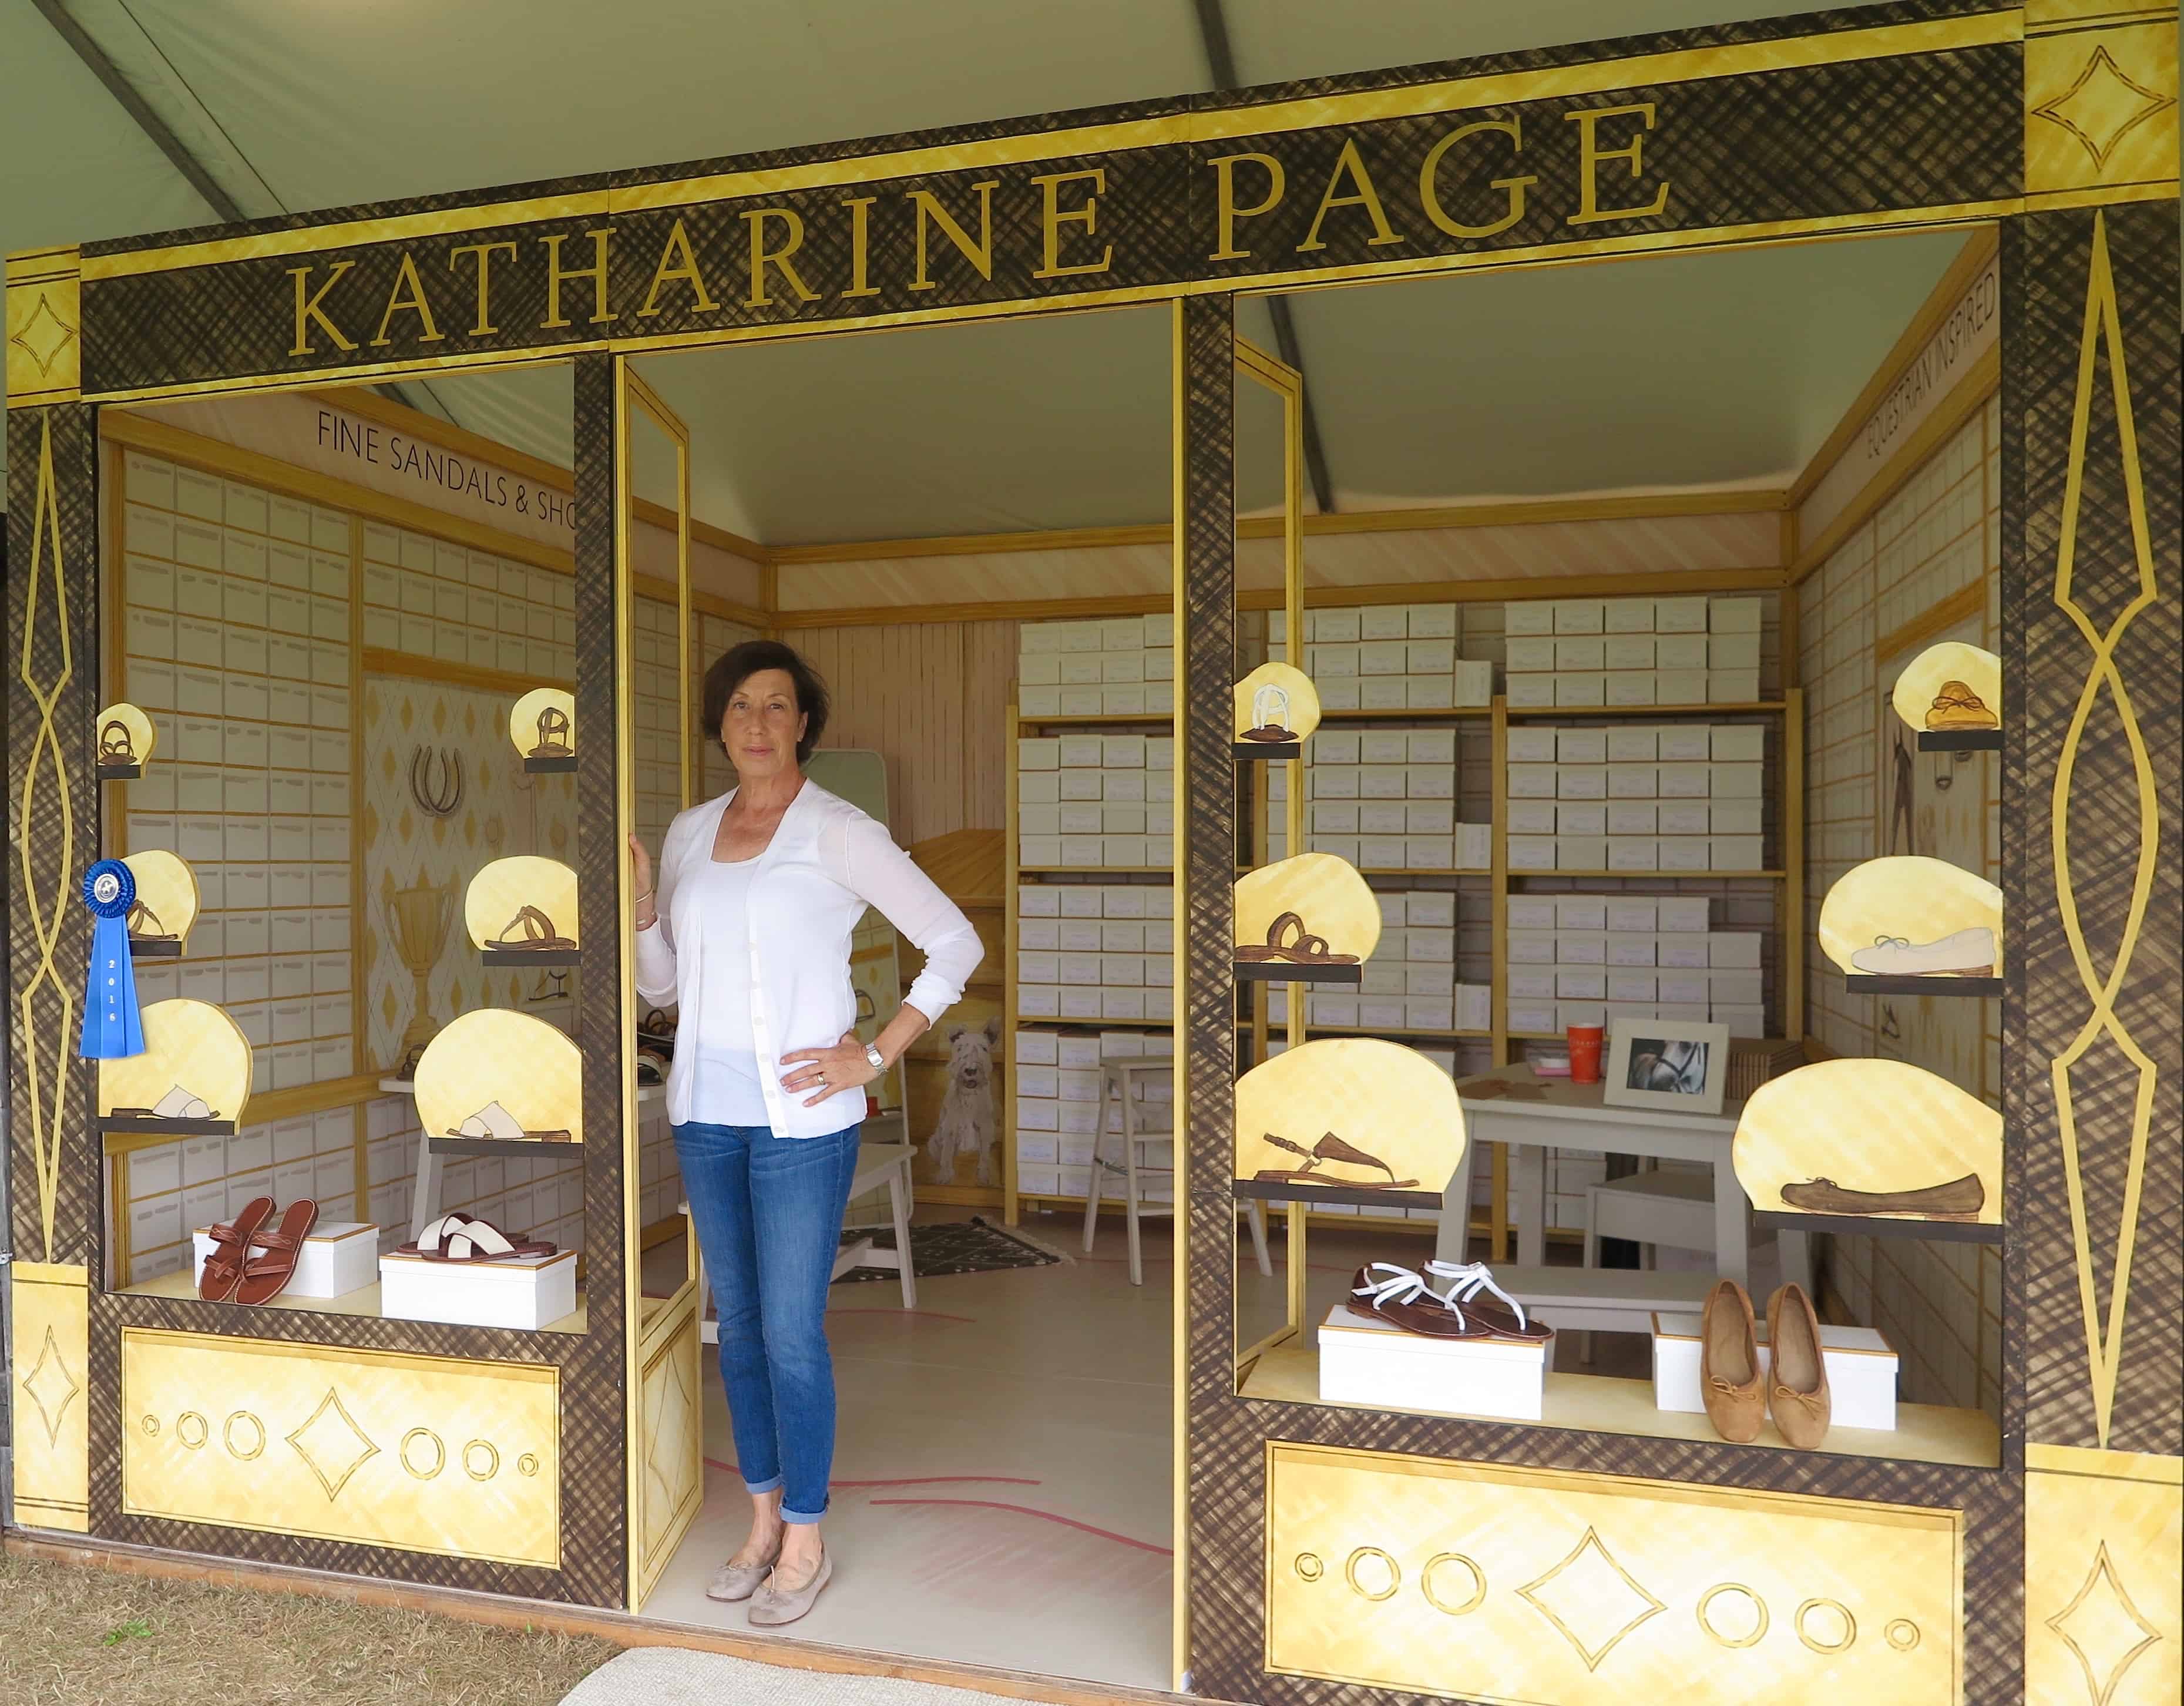 Katharine Page: Best Booth at Hampton Classic